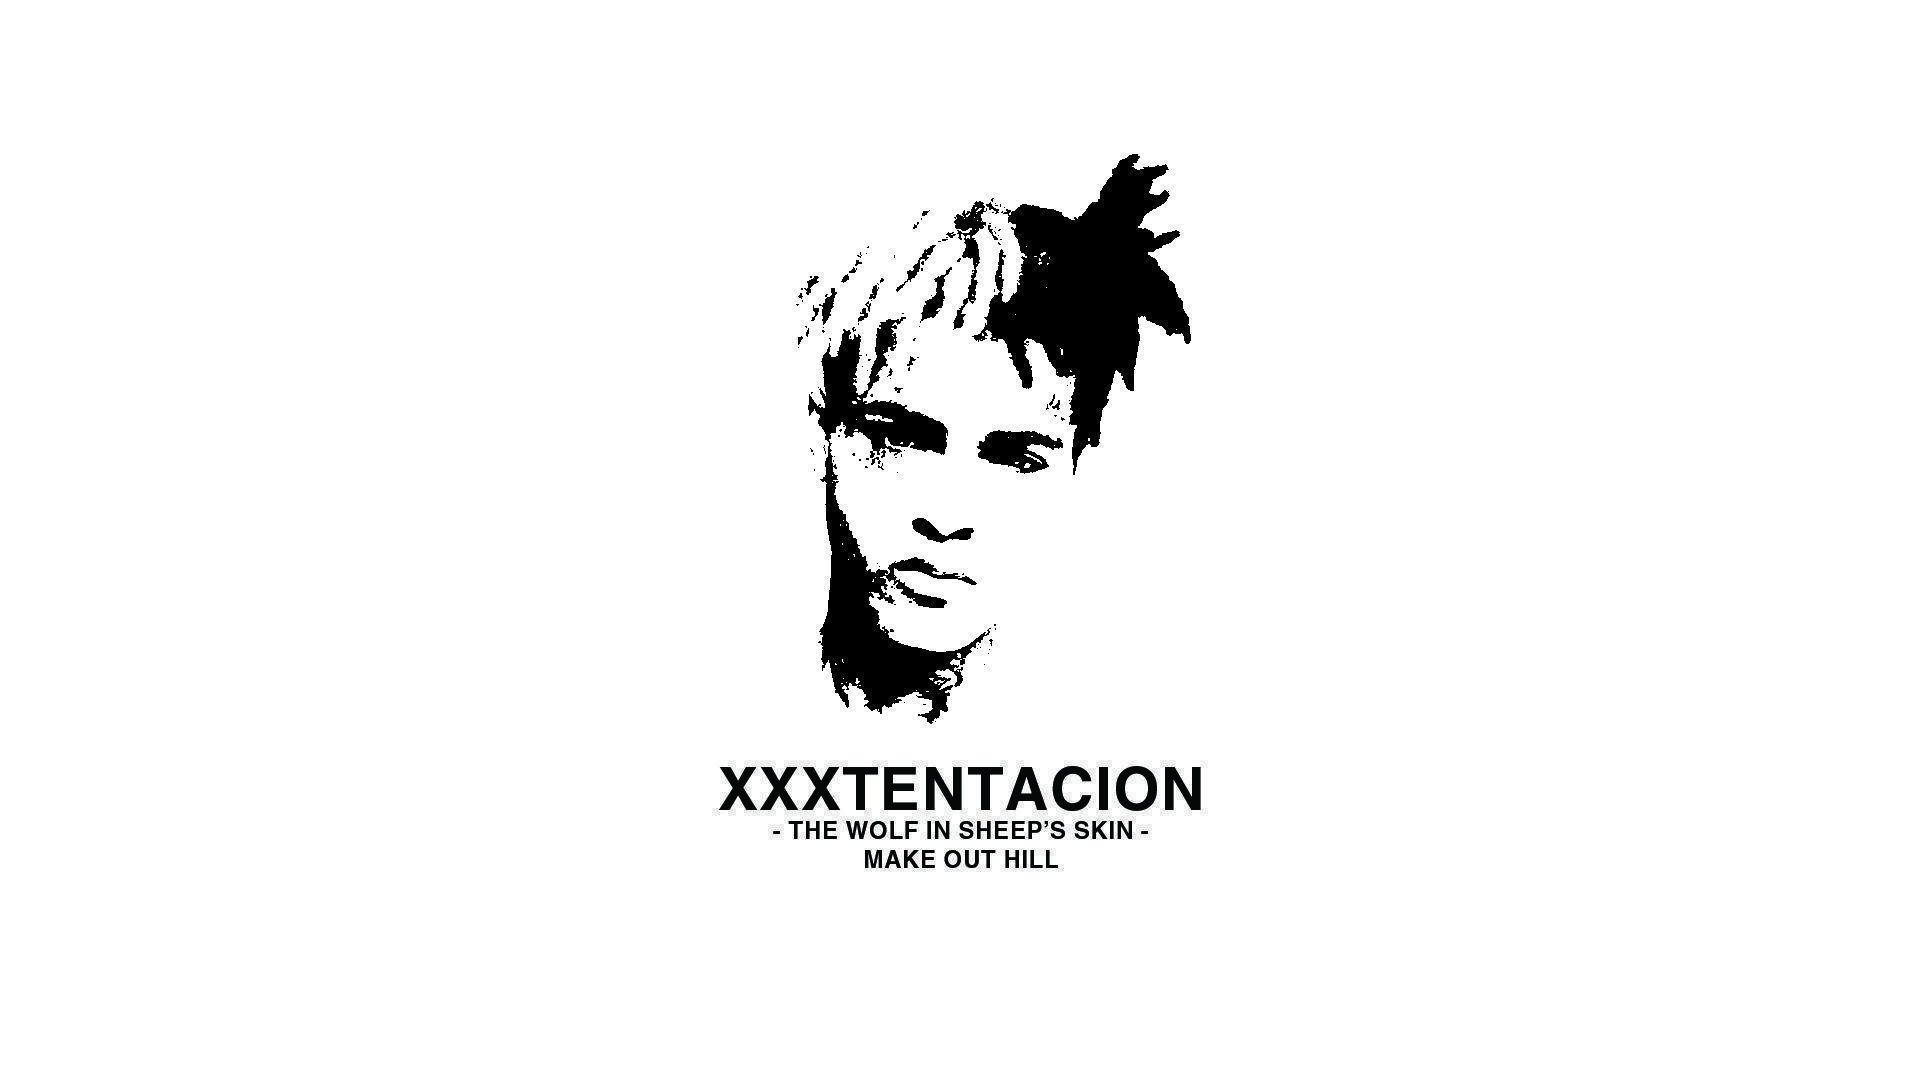 Made a background for X. Phone resolution in comments